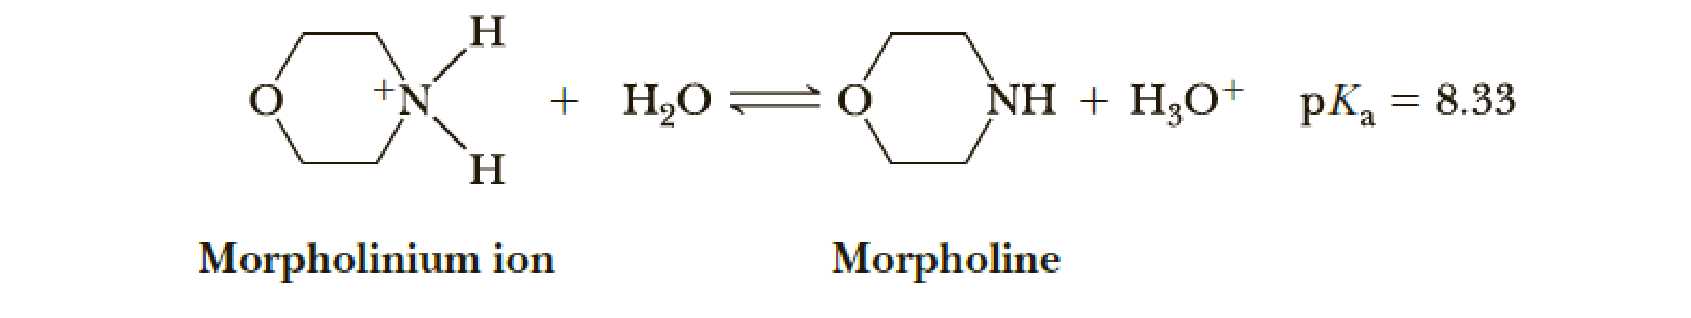 Chapter 23, Problem 23.26P, The pKa, of the conjugate acid of morpholine is 8.33. (a) Calculate the ratio of morpholine to 